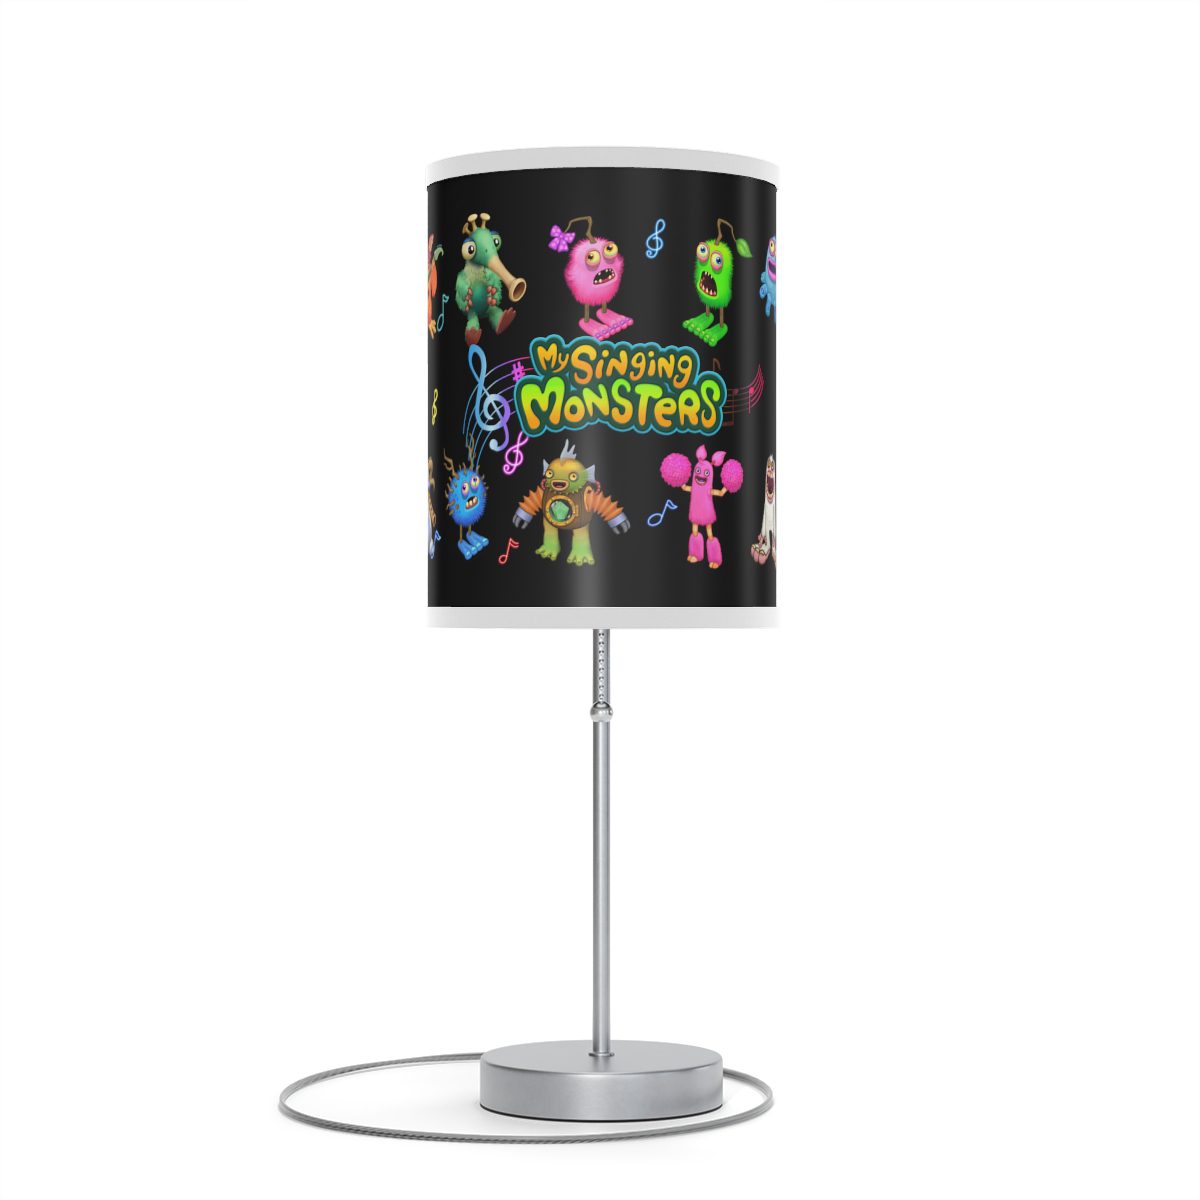 My Singing Monsters Black Lamp with Colorful Characters Cool Kiddo 22